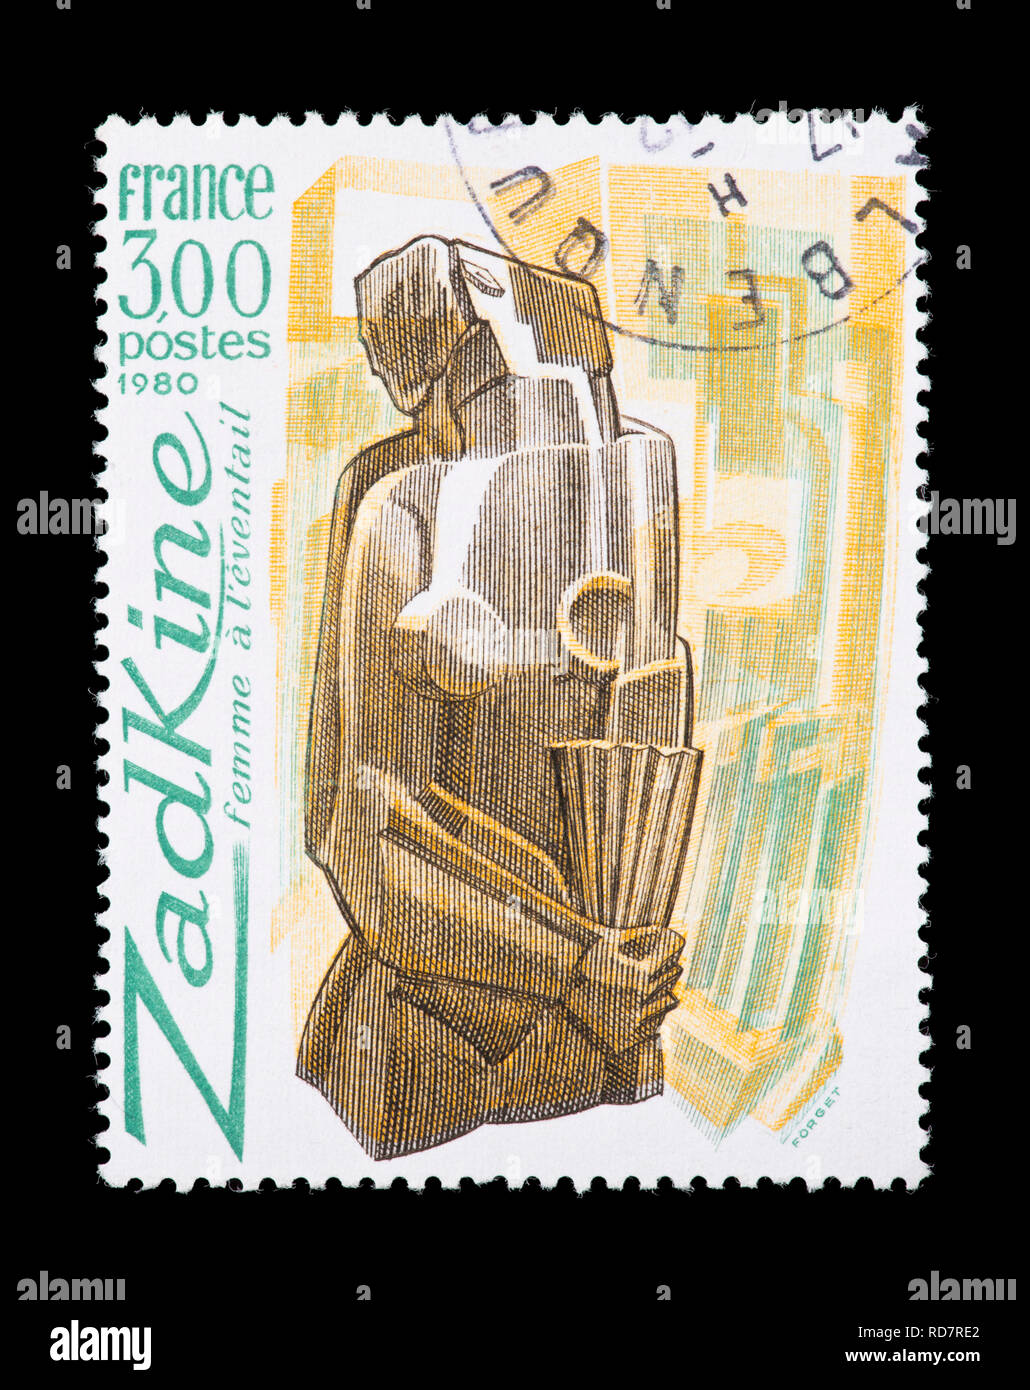 Postage stamp from France depicting the Ossip Zadkine art 'Woman Holding Fan' Stock Photo